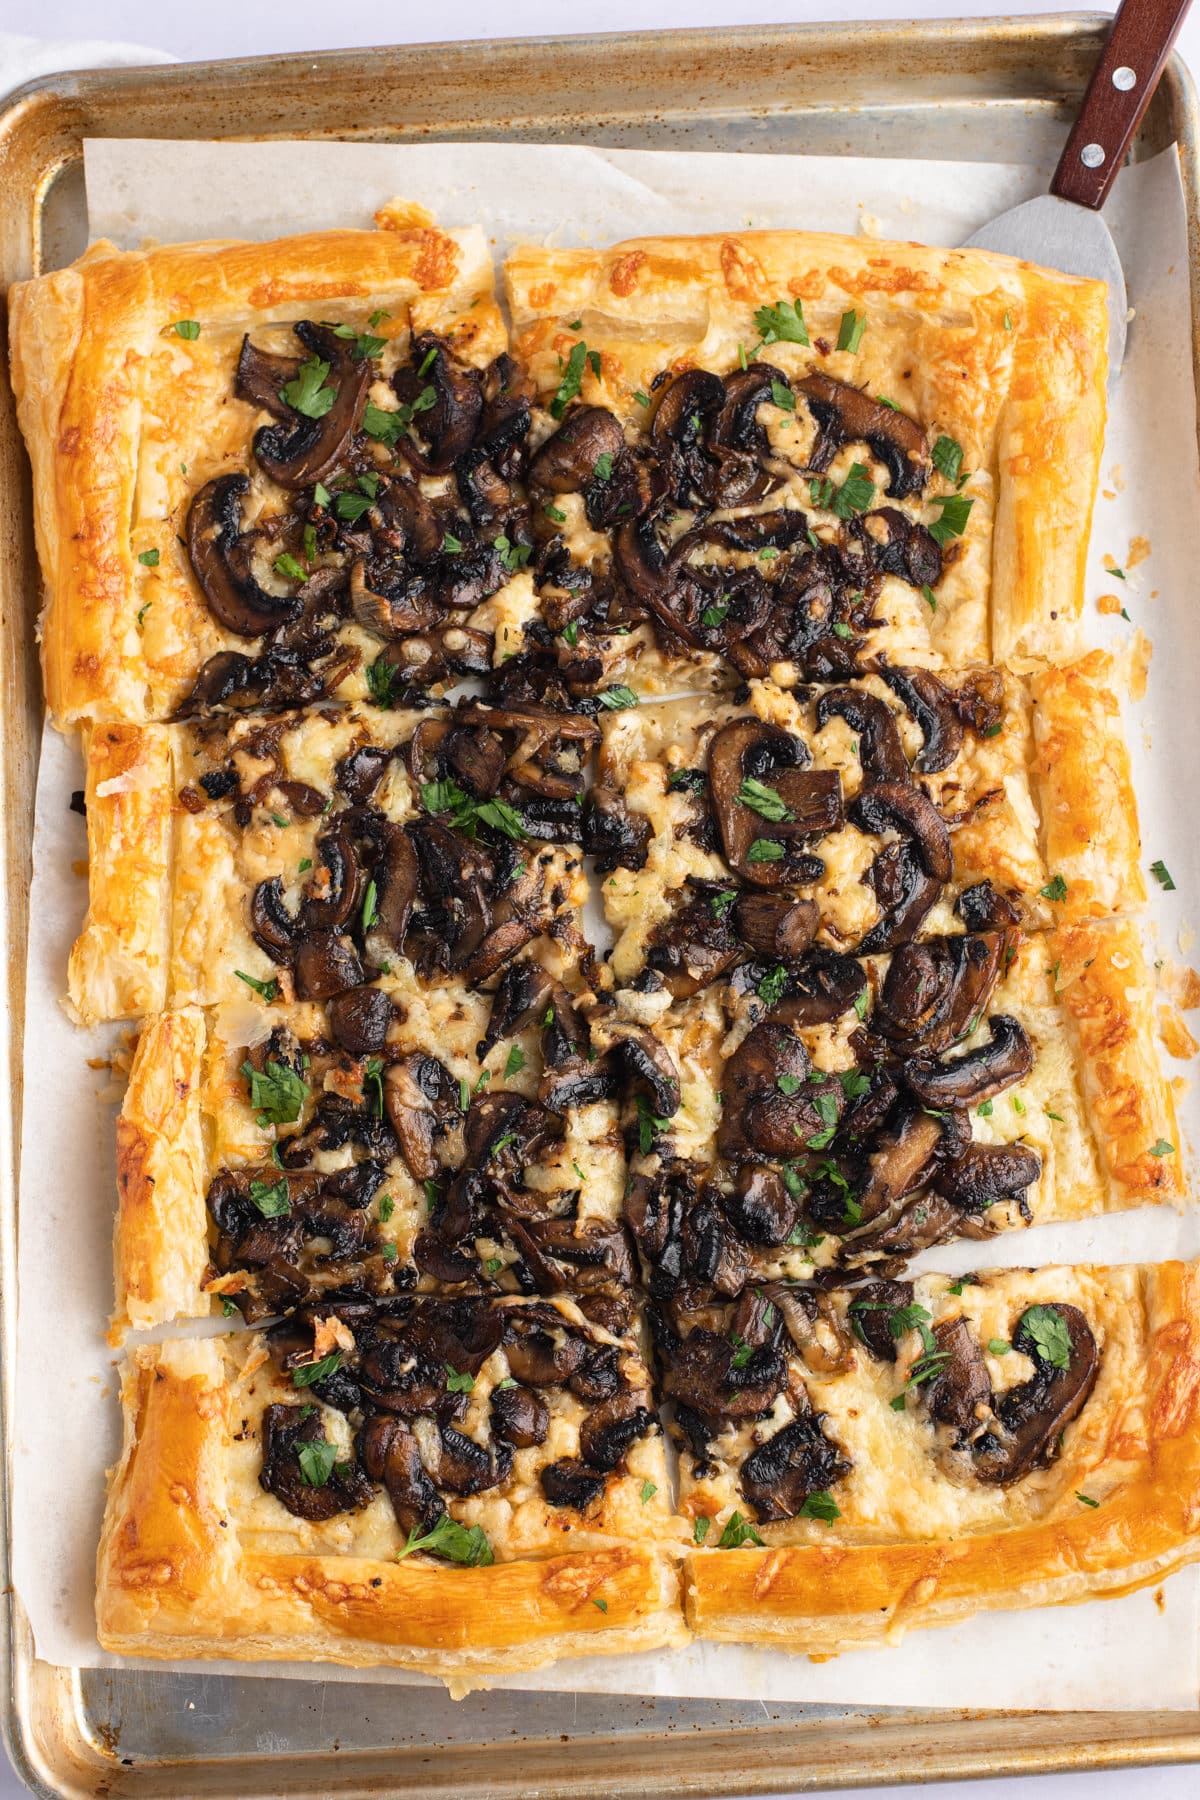 A mushroom tart cut into pieces and garnished with fresh parsley.